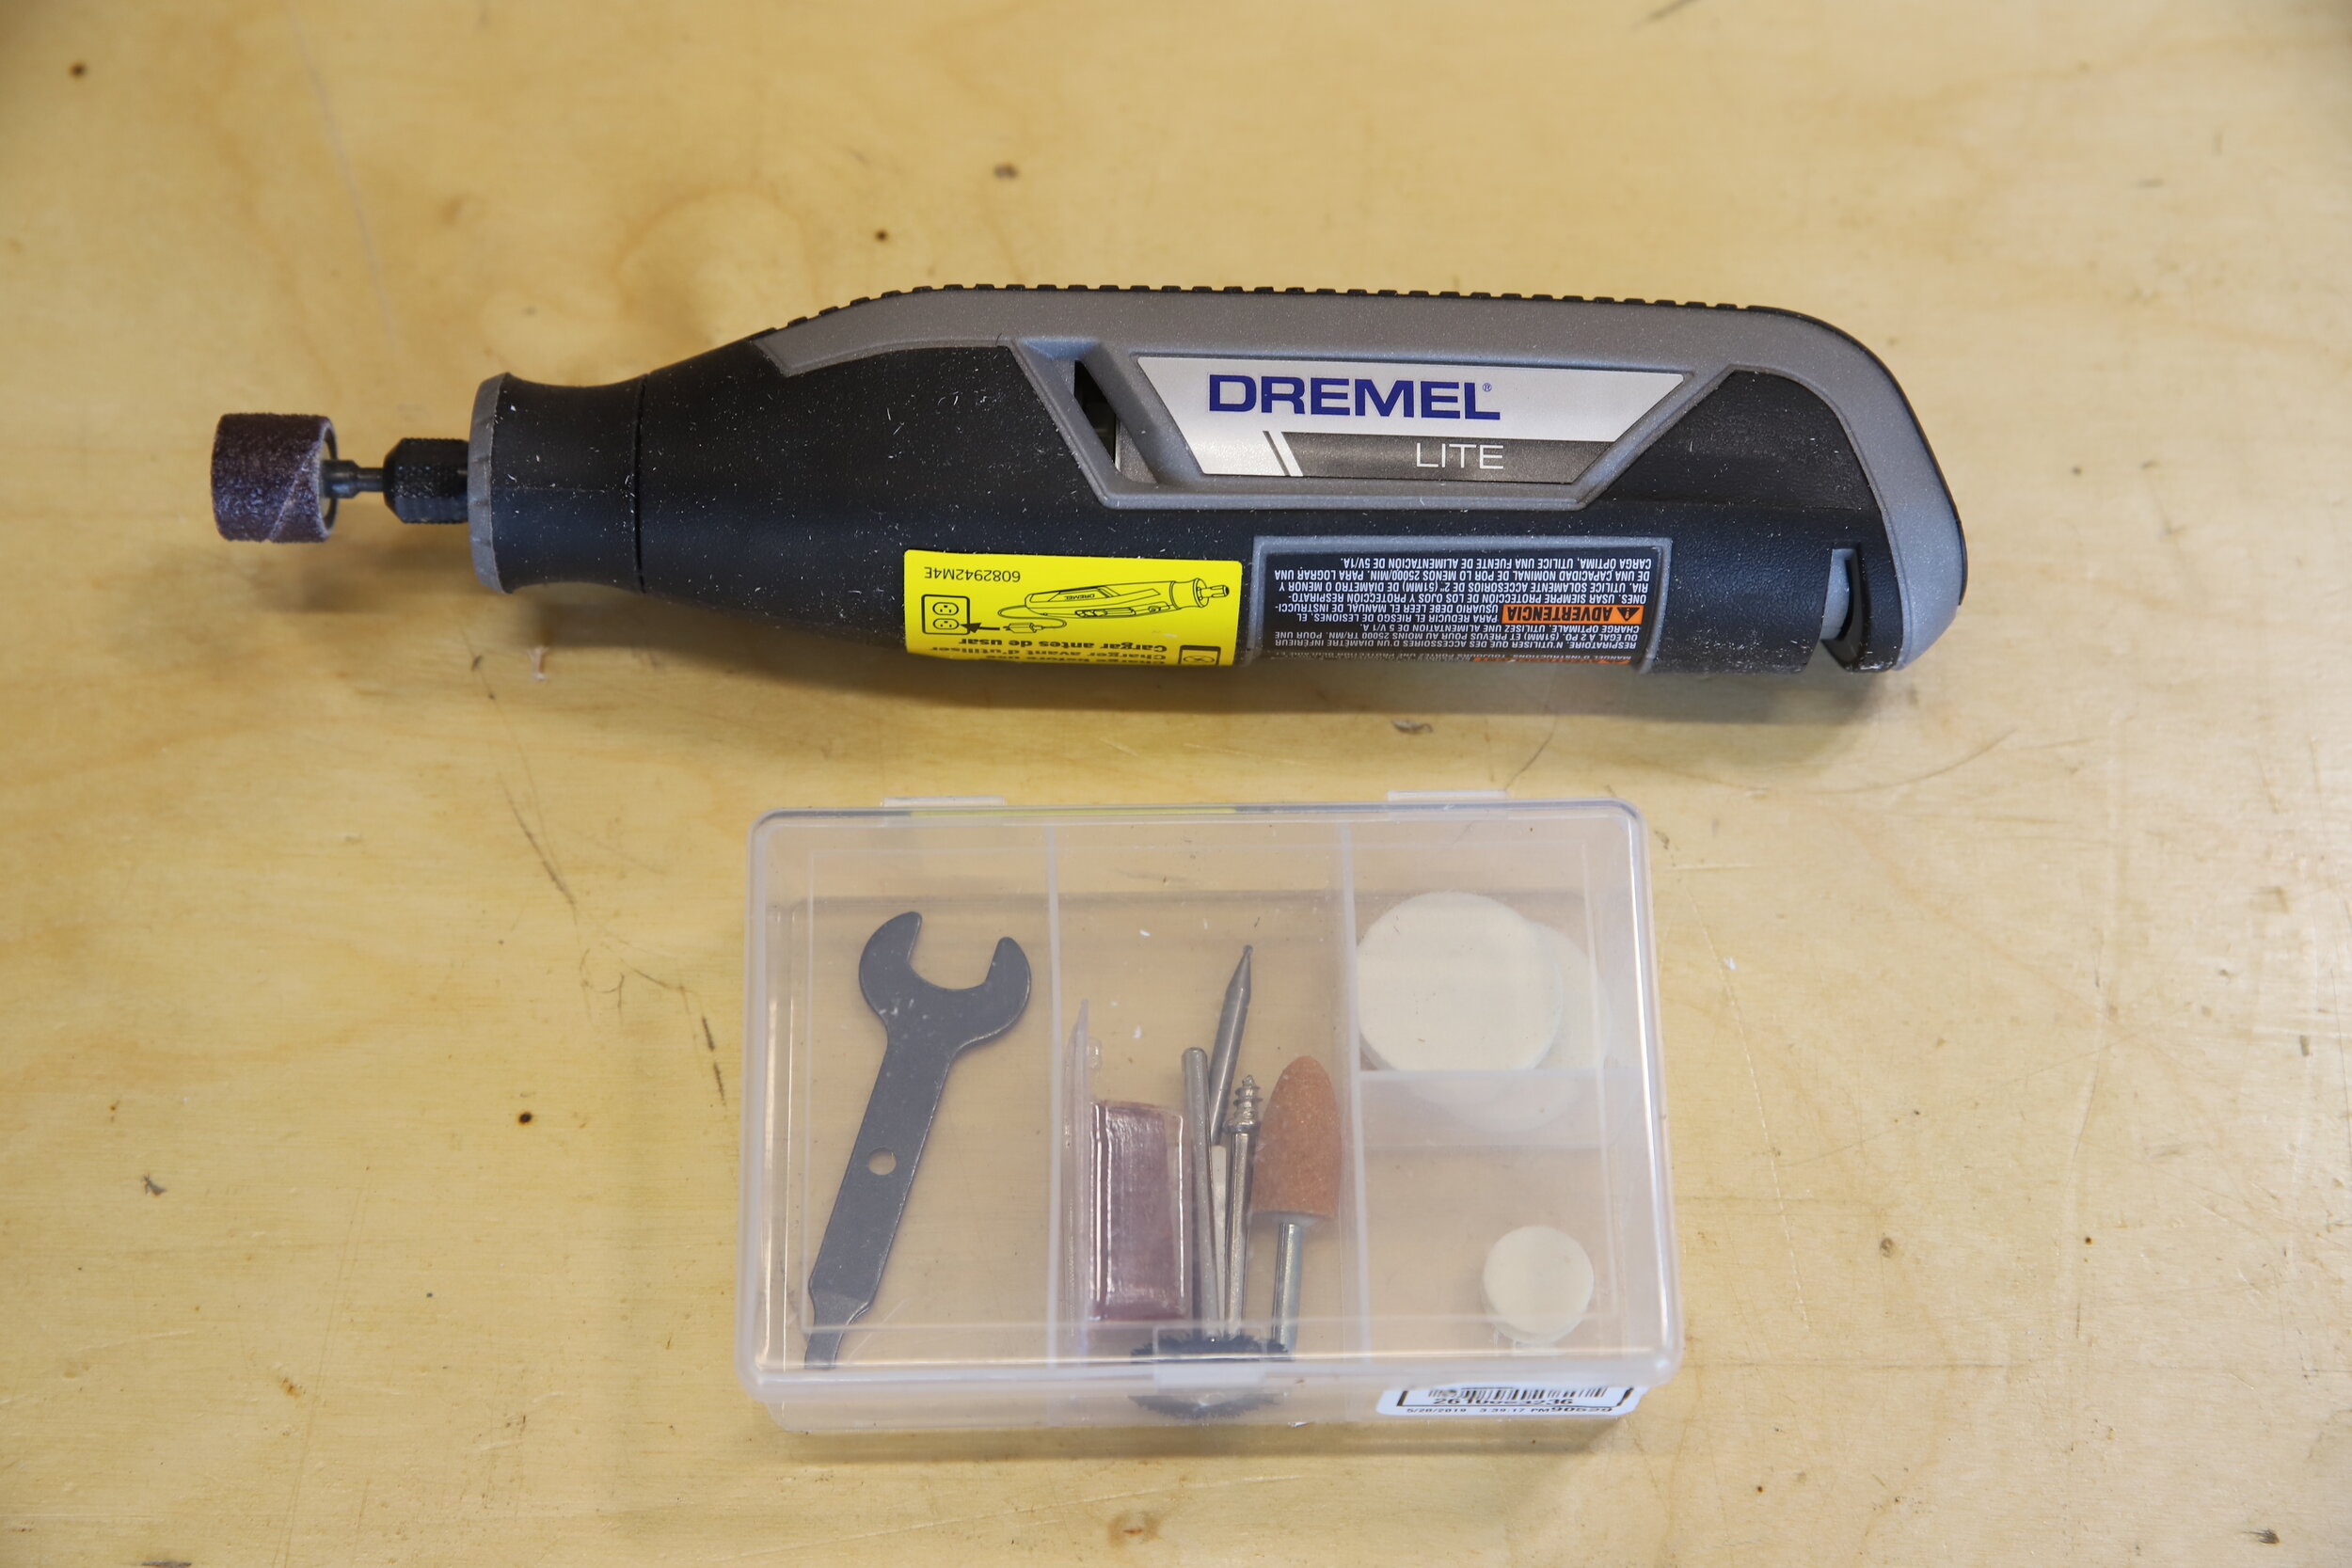 Dremel – connected and cordless, the future of Dremel - Journal - TEAMS